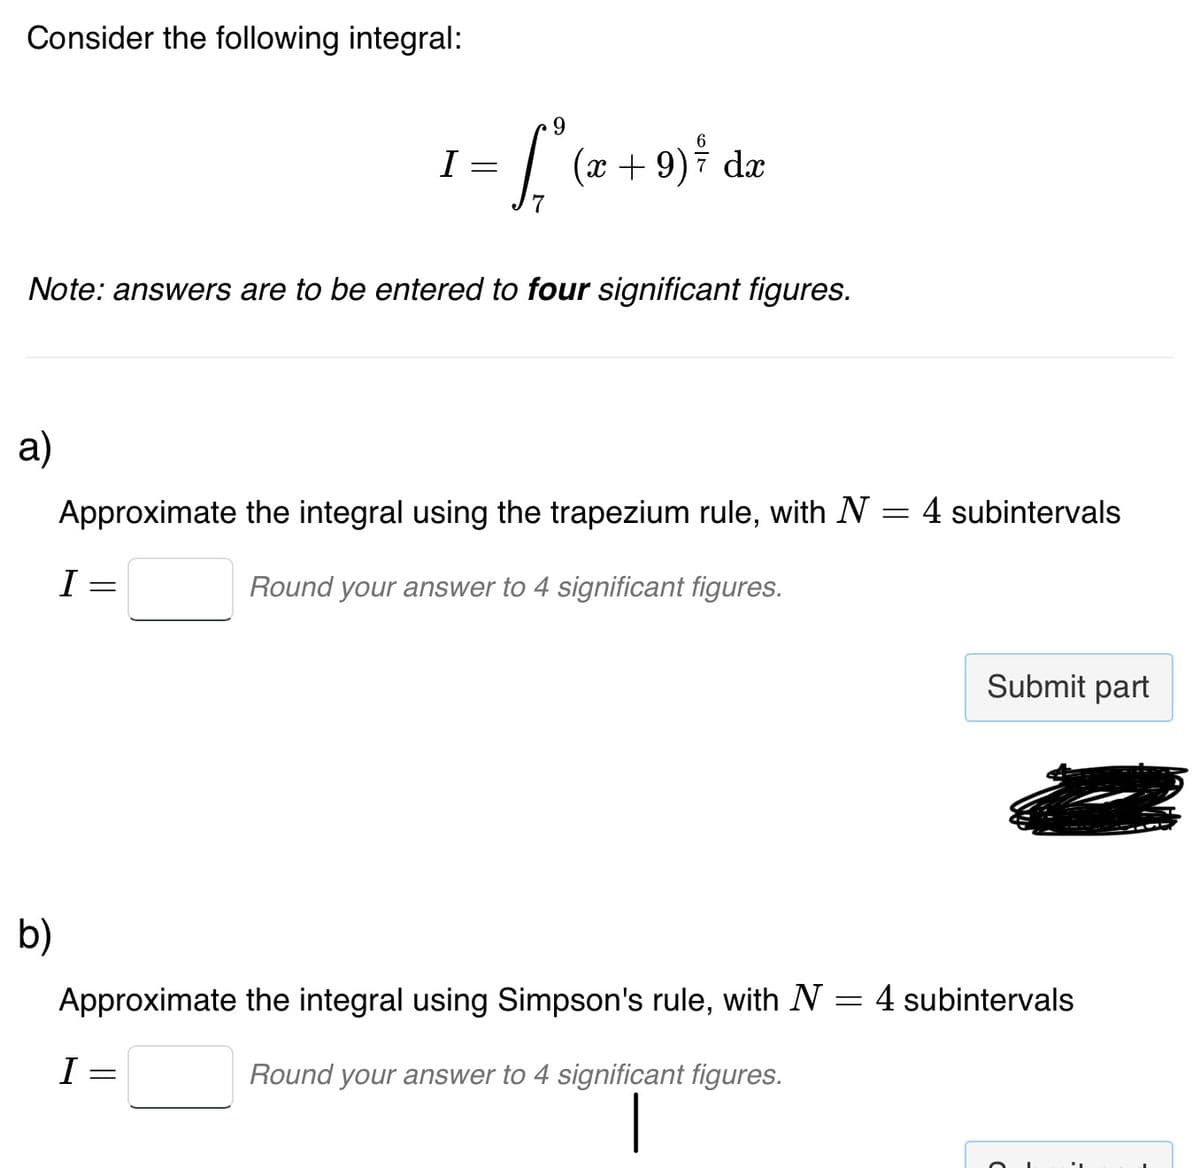 Consider the following integral:
a)
b)
Note: answers are to be entered to four significant figures.
I
· L² (2²+
7
Approximate the integral using the trapezium rule, with N
Round your answer to 4 significant figures.
=
I
I =
(x +9) / dx
=
Approximate the integral using Simpson's rule, with N
Round your answer to 4 significant figures.
=
= 4 subintervals
Submit part
4 subintervals